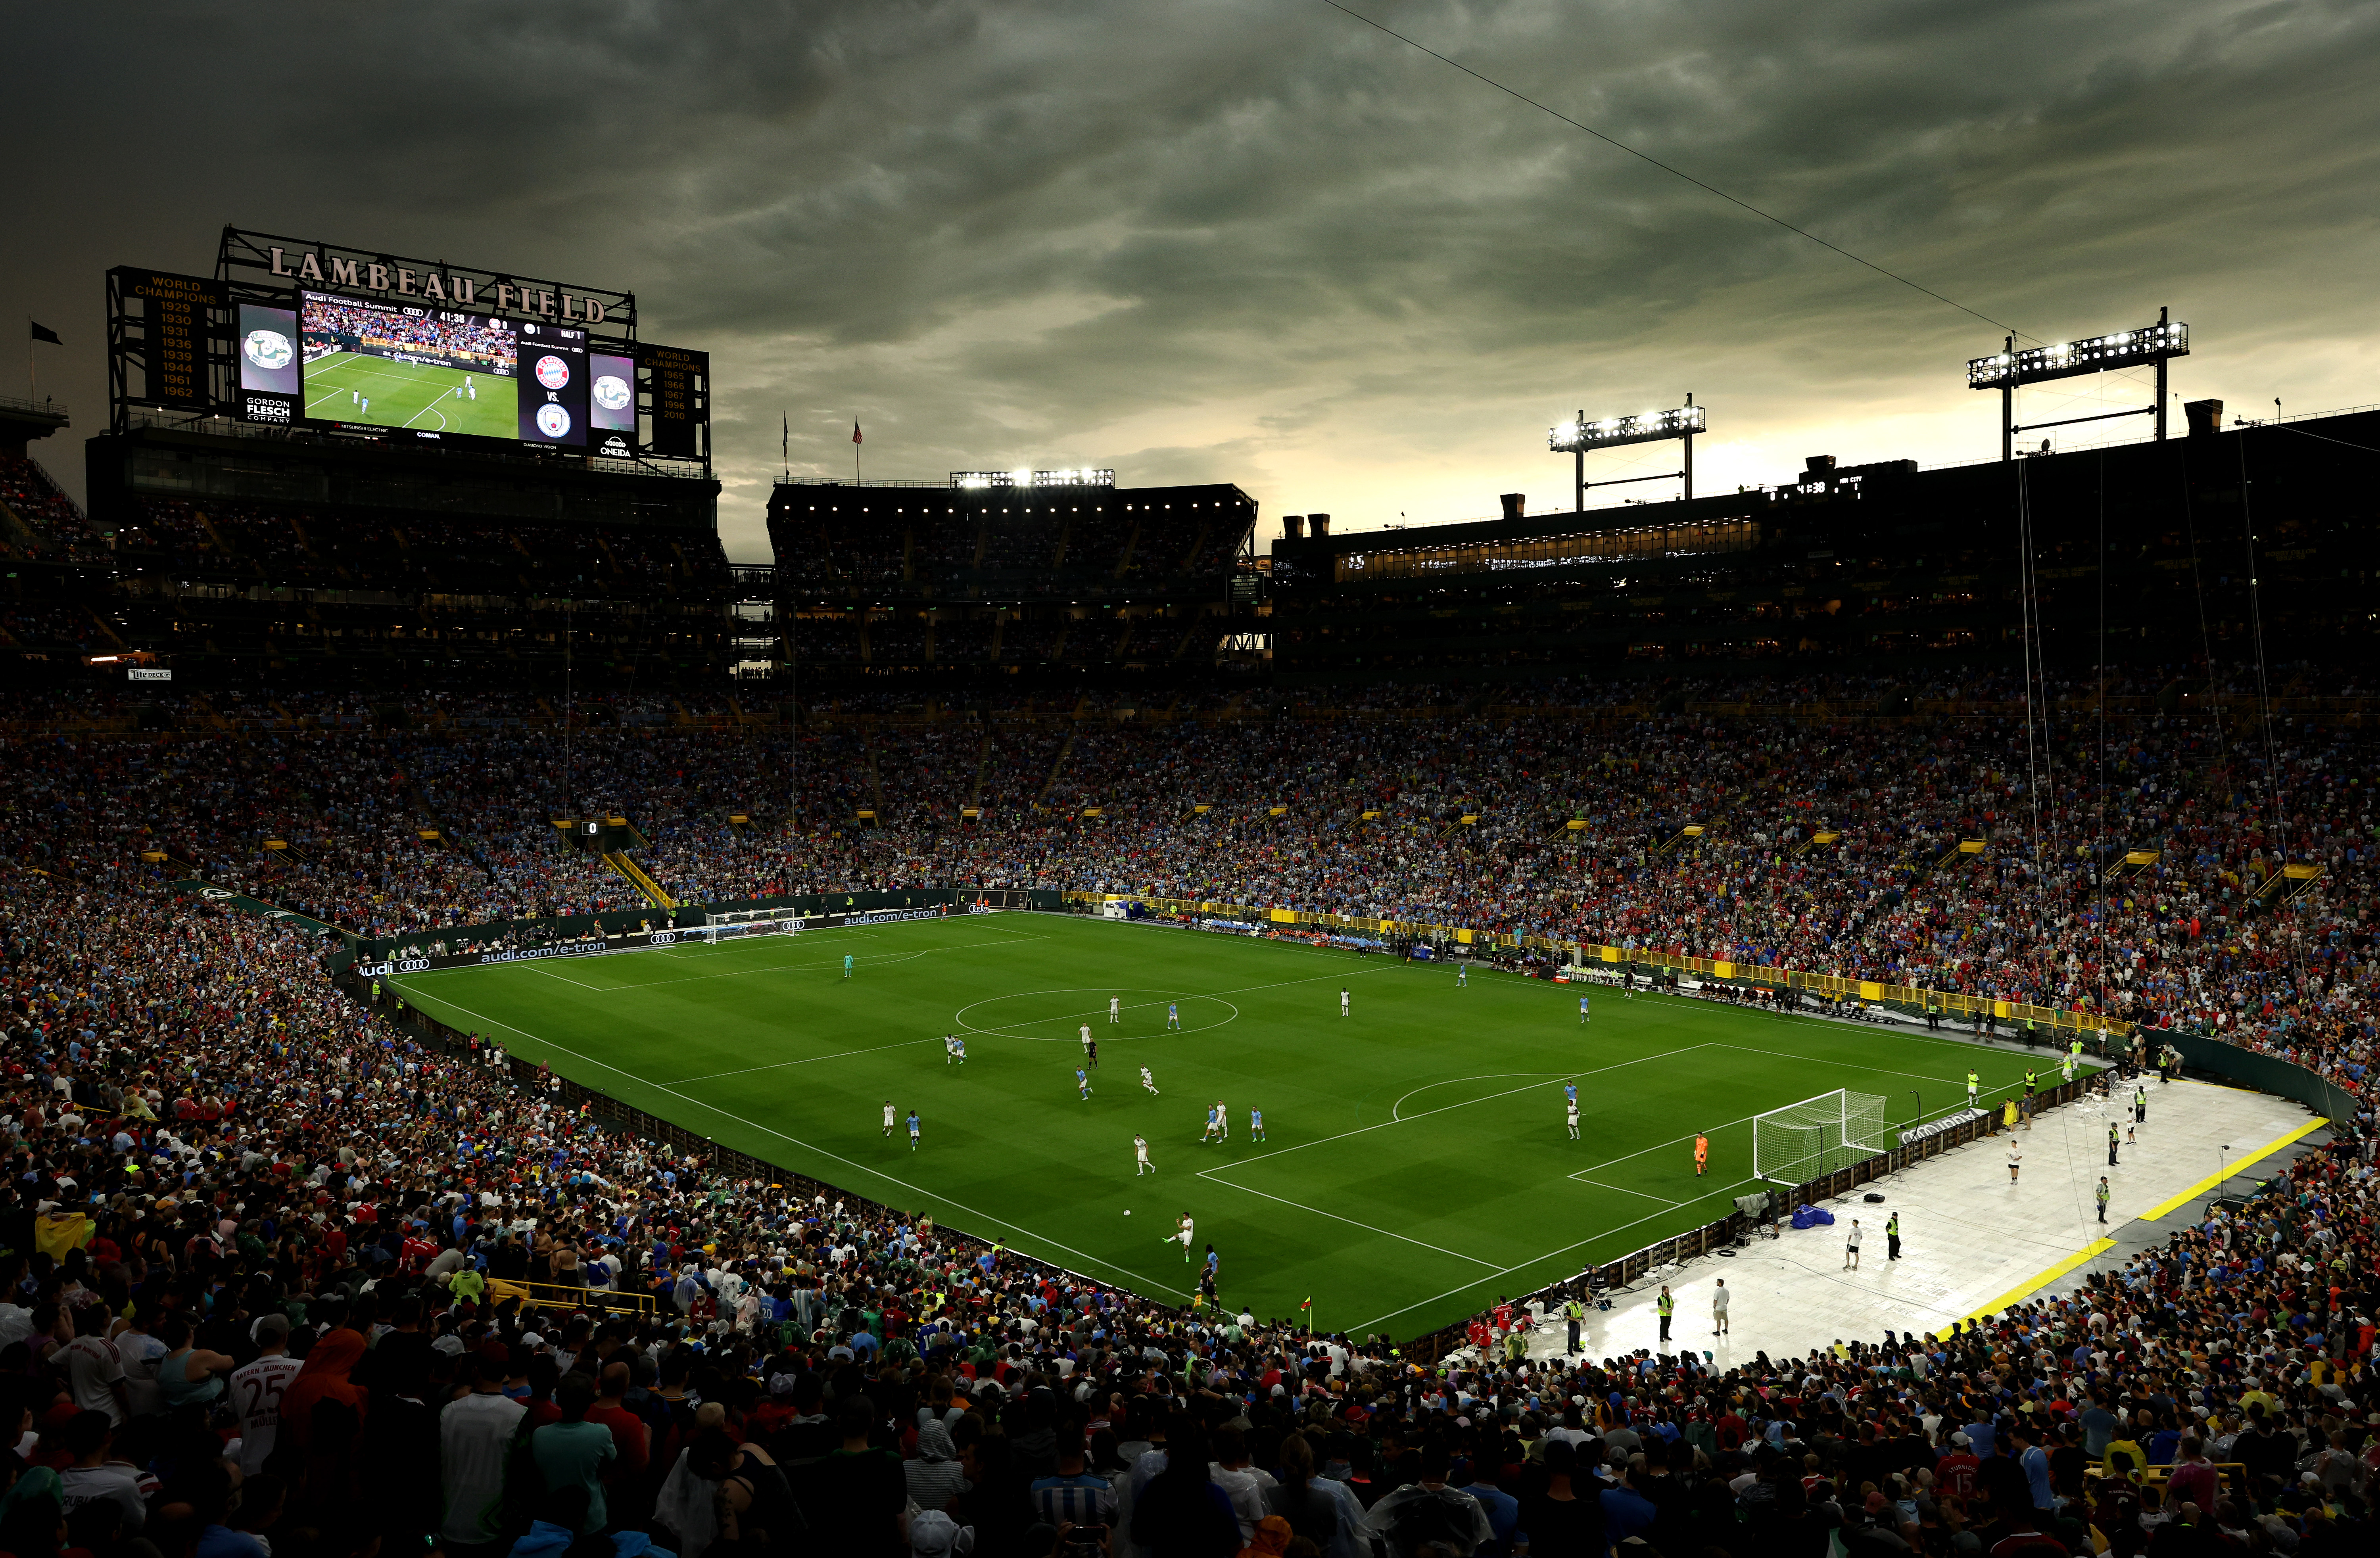 Wide shot of Lambeau Field during the game, a dull yellow sky covered in dark storm clouds looming above